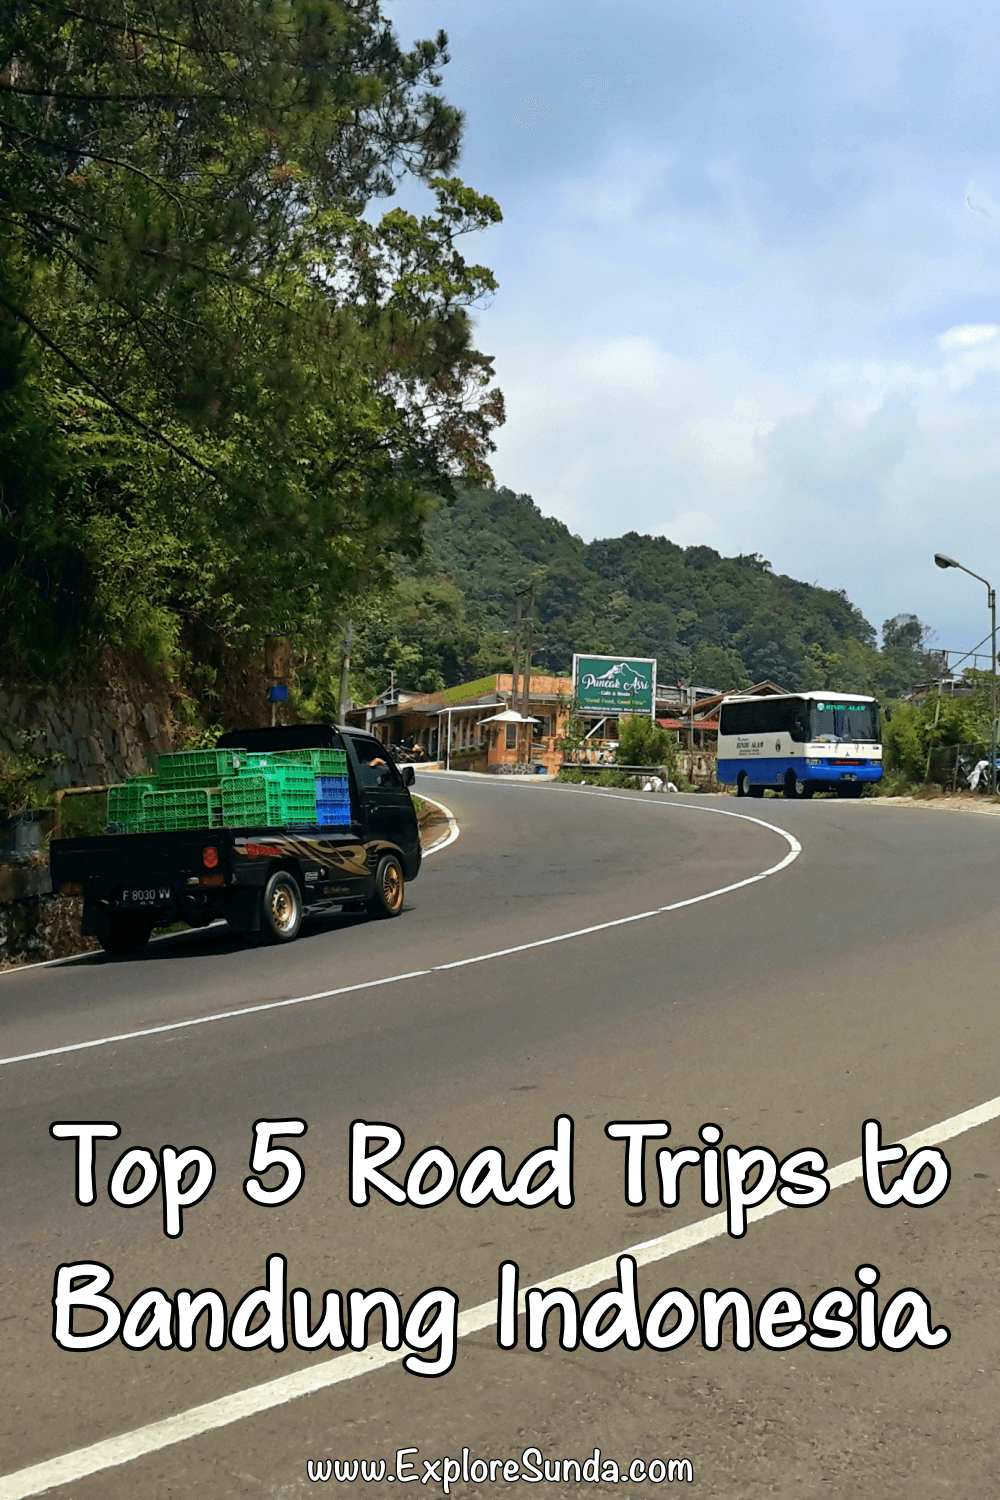 Road Trip to Bandung Indonesia | The Best Five